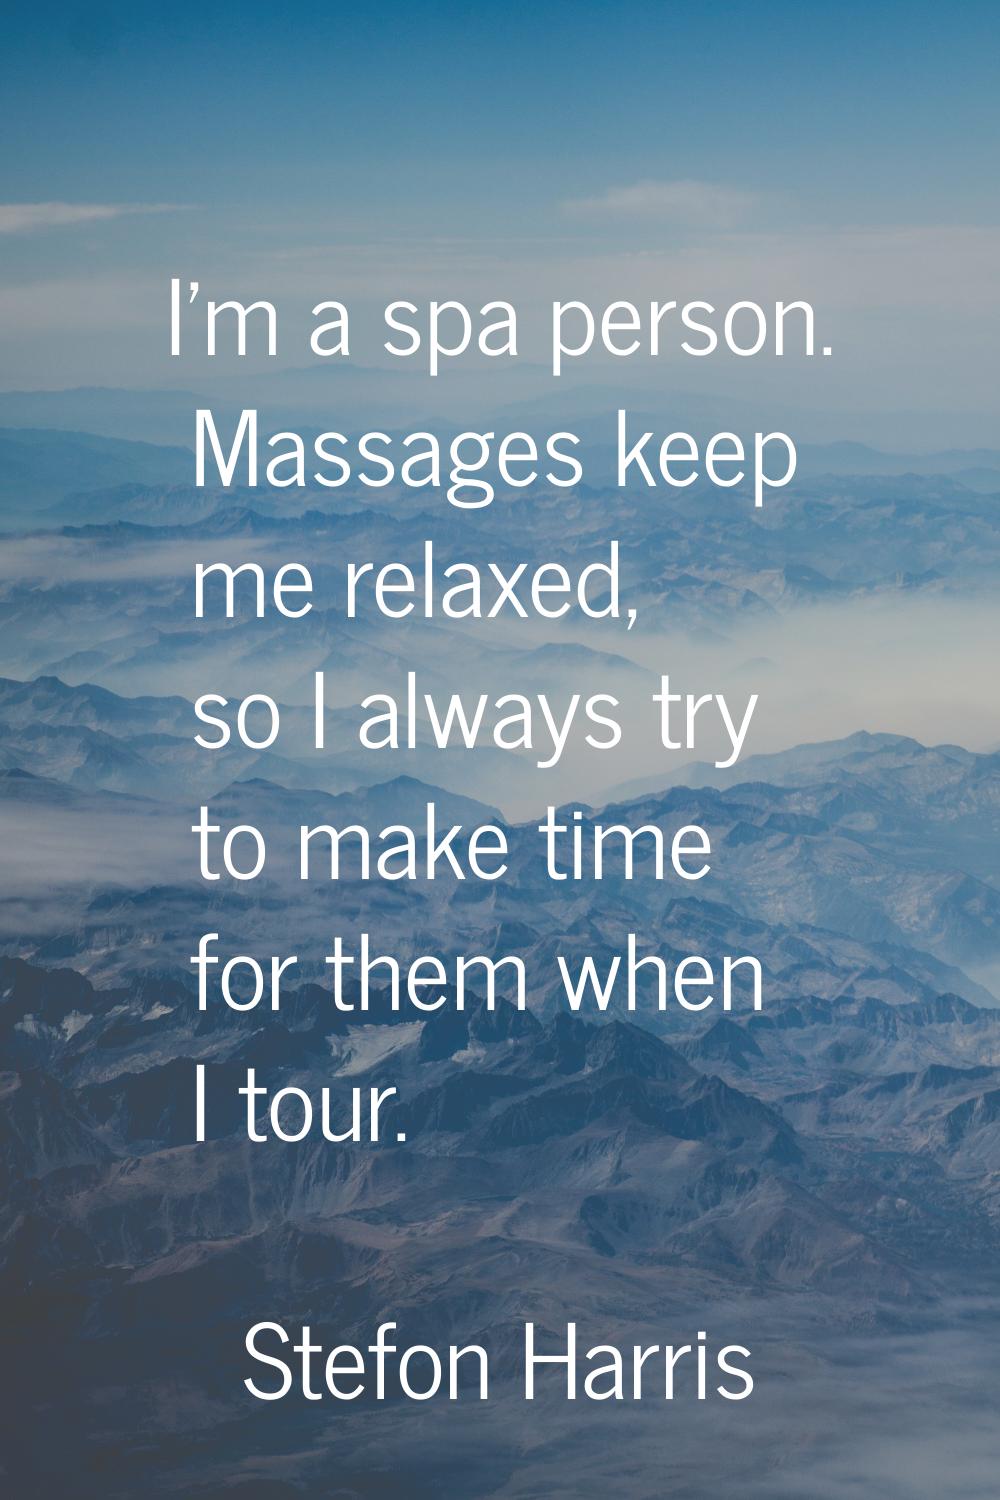 I'm a spa person. Massages keep me relaxed, so I always try to make time for them when I tour.